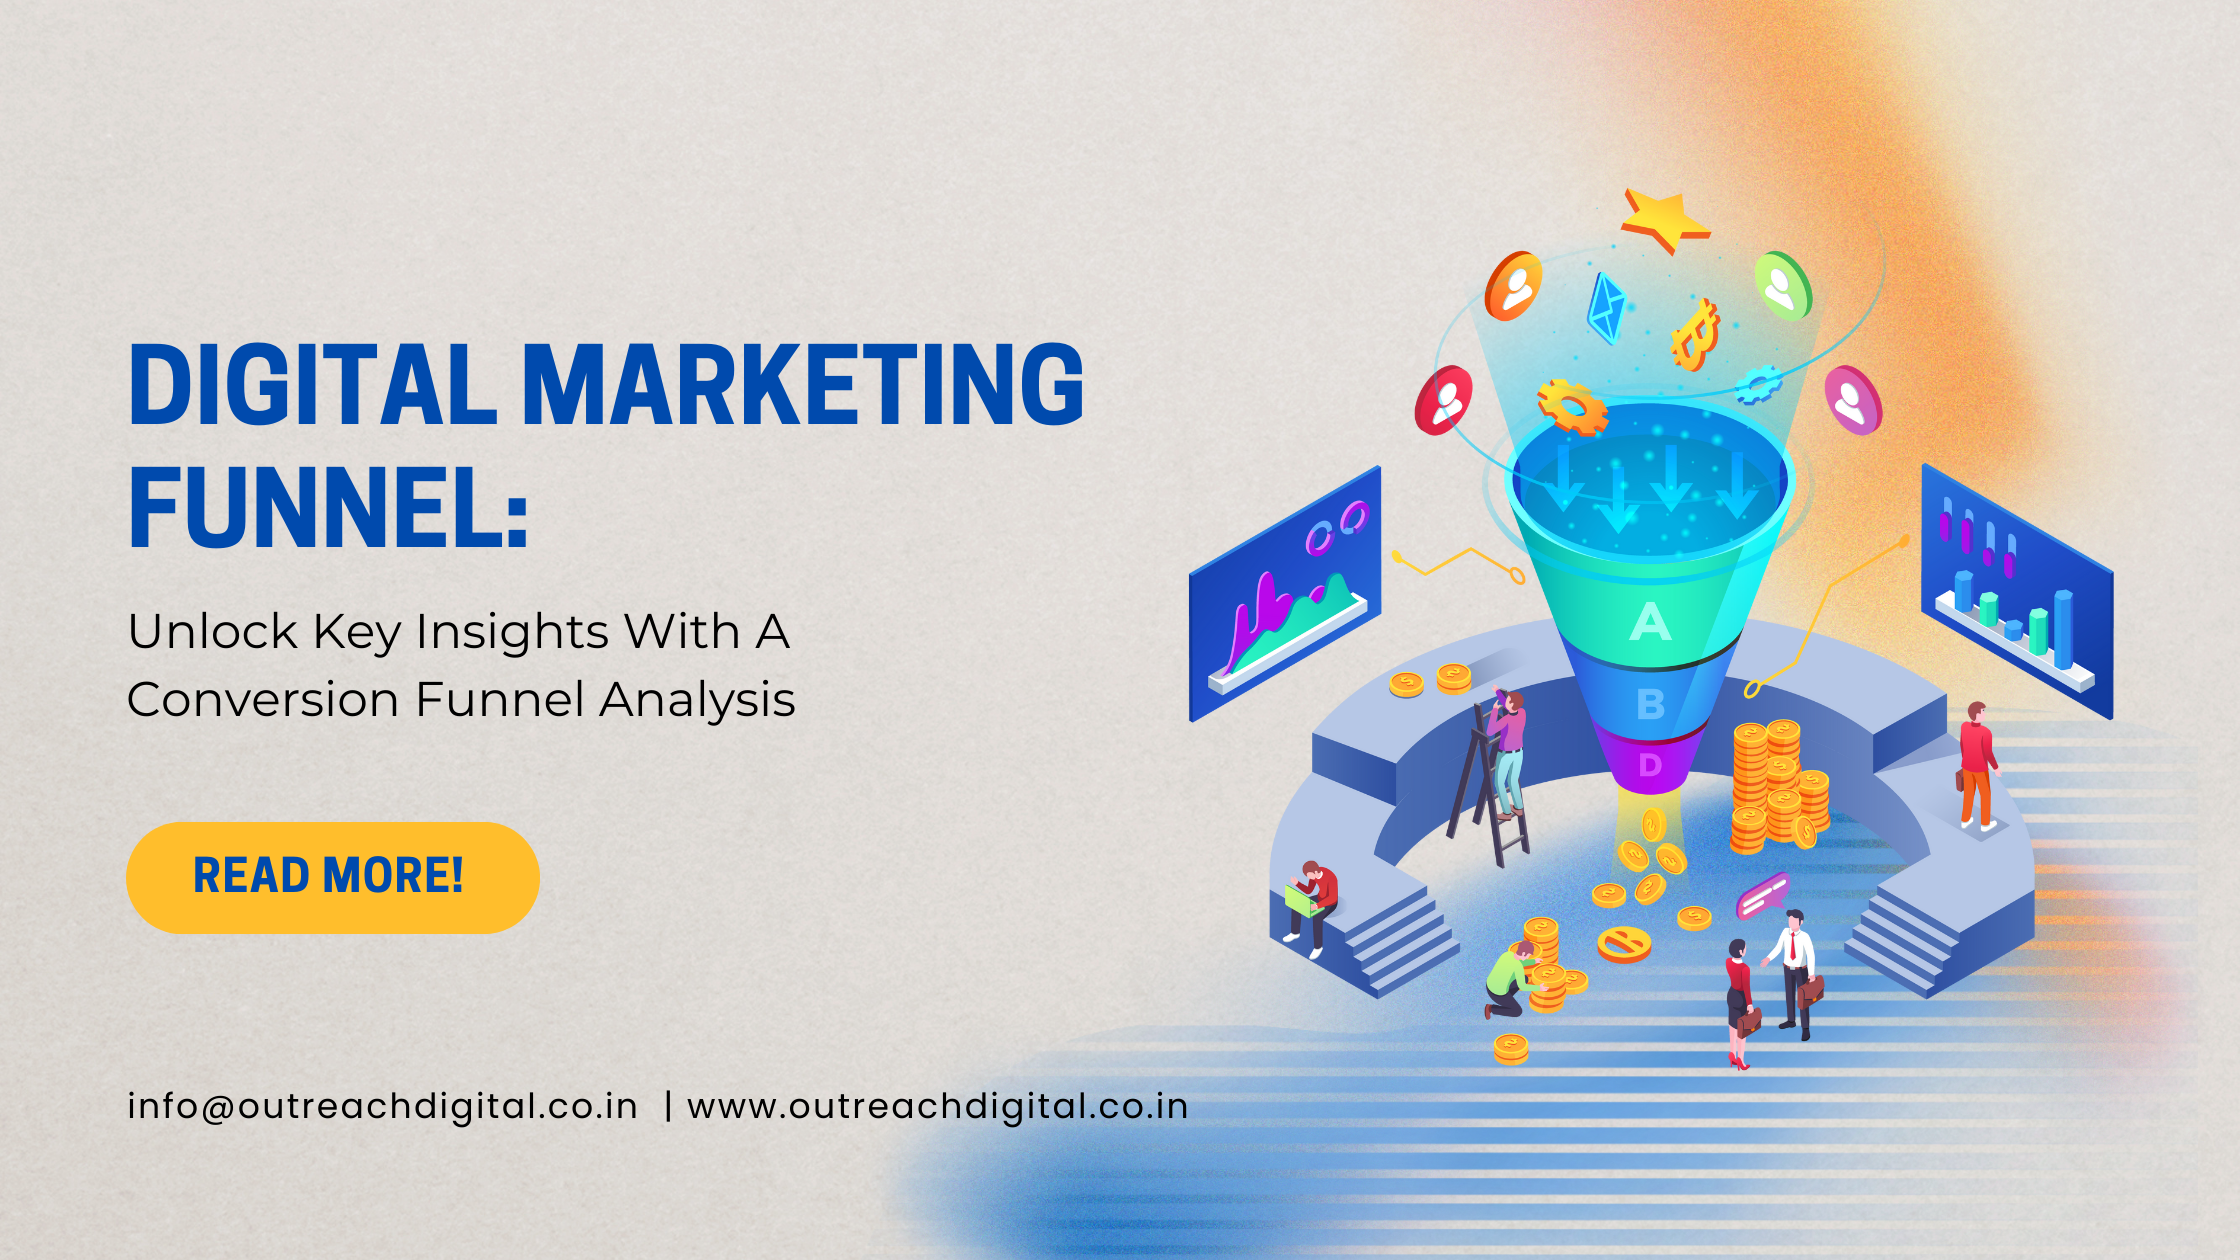 Digital Marketing Funnel: Unlock Key Insights With A Conversion Funnel Analysis